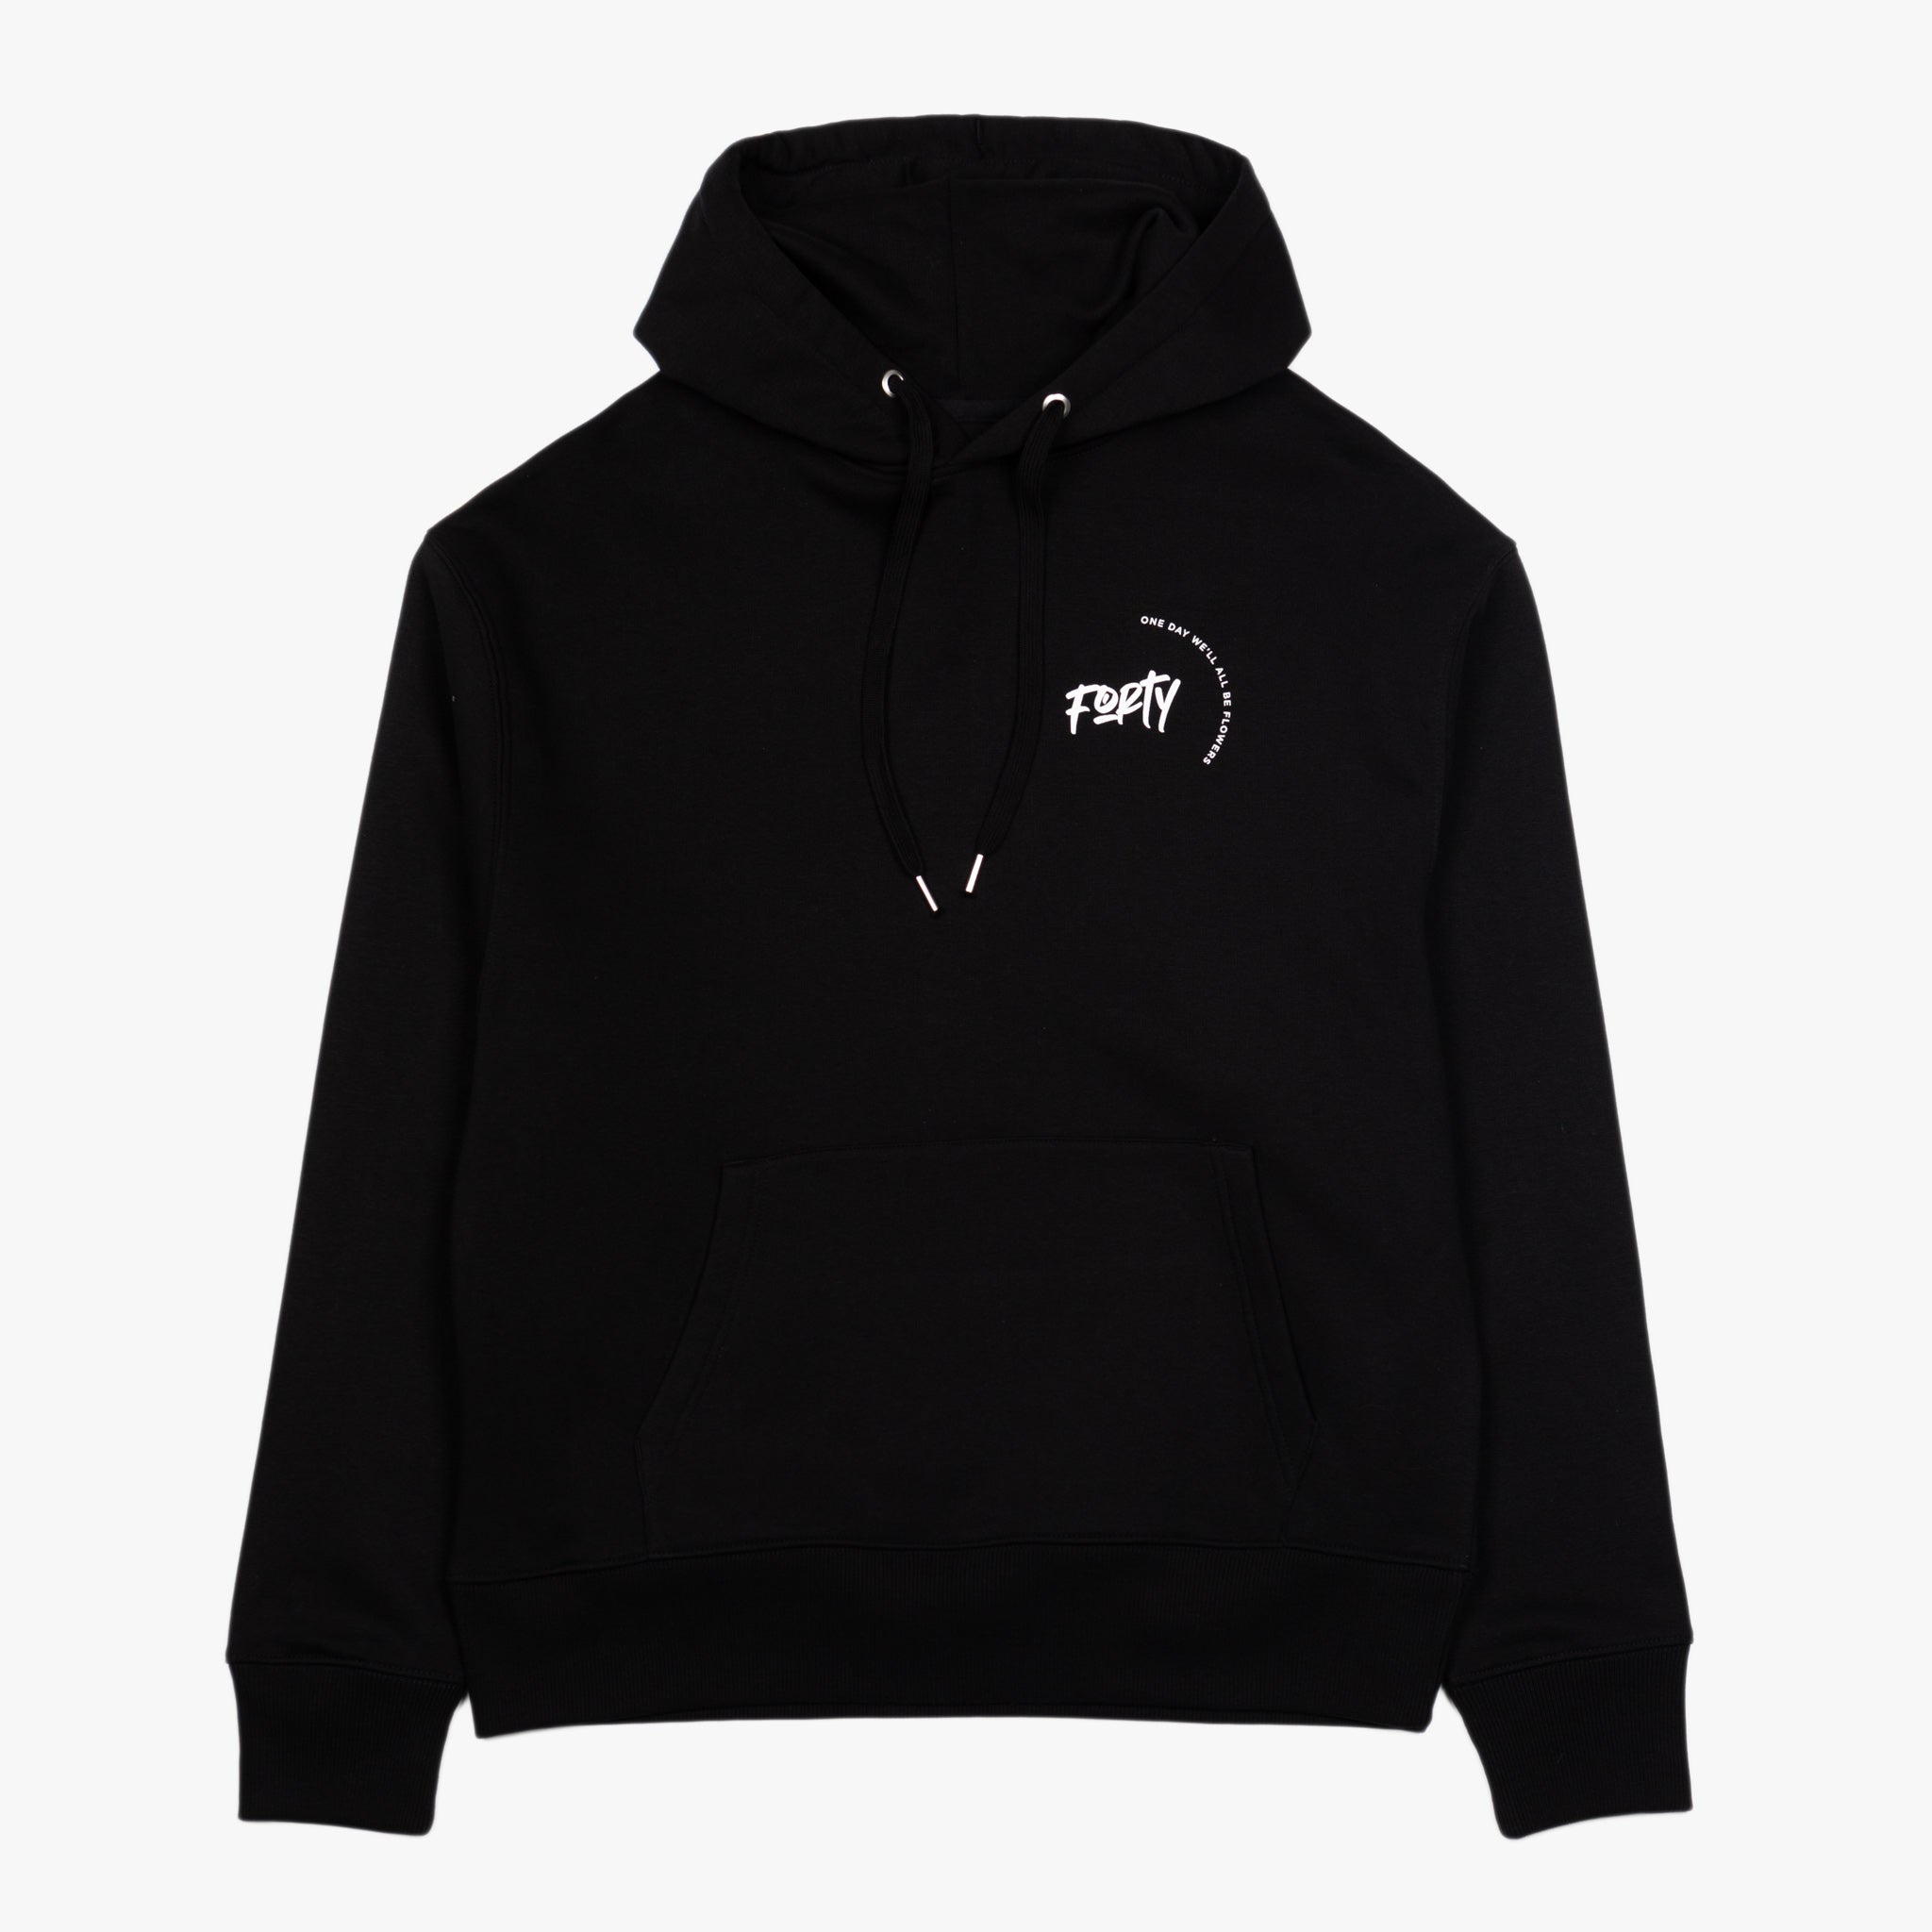 Incarnation Hoodie (Black/White) – Forty Clothing